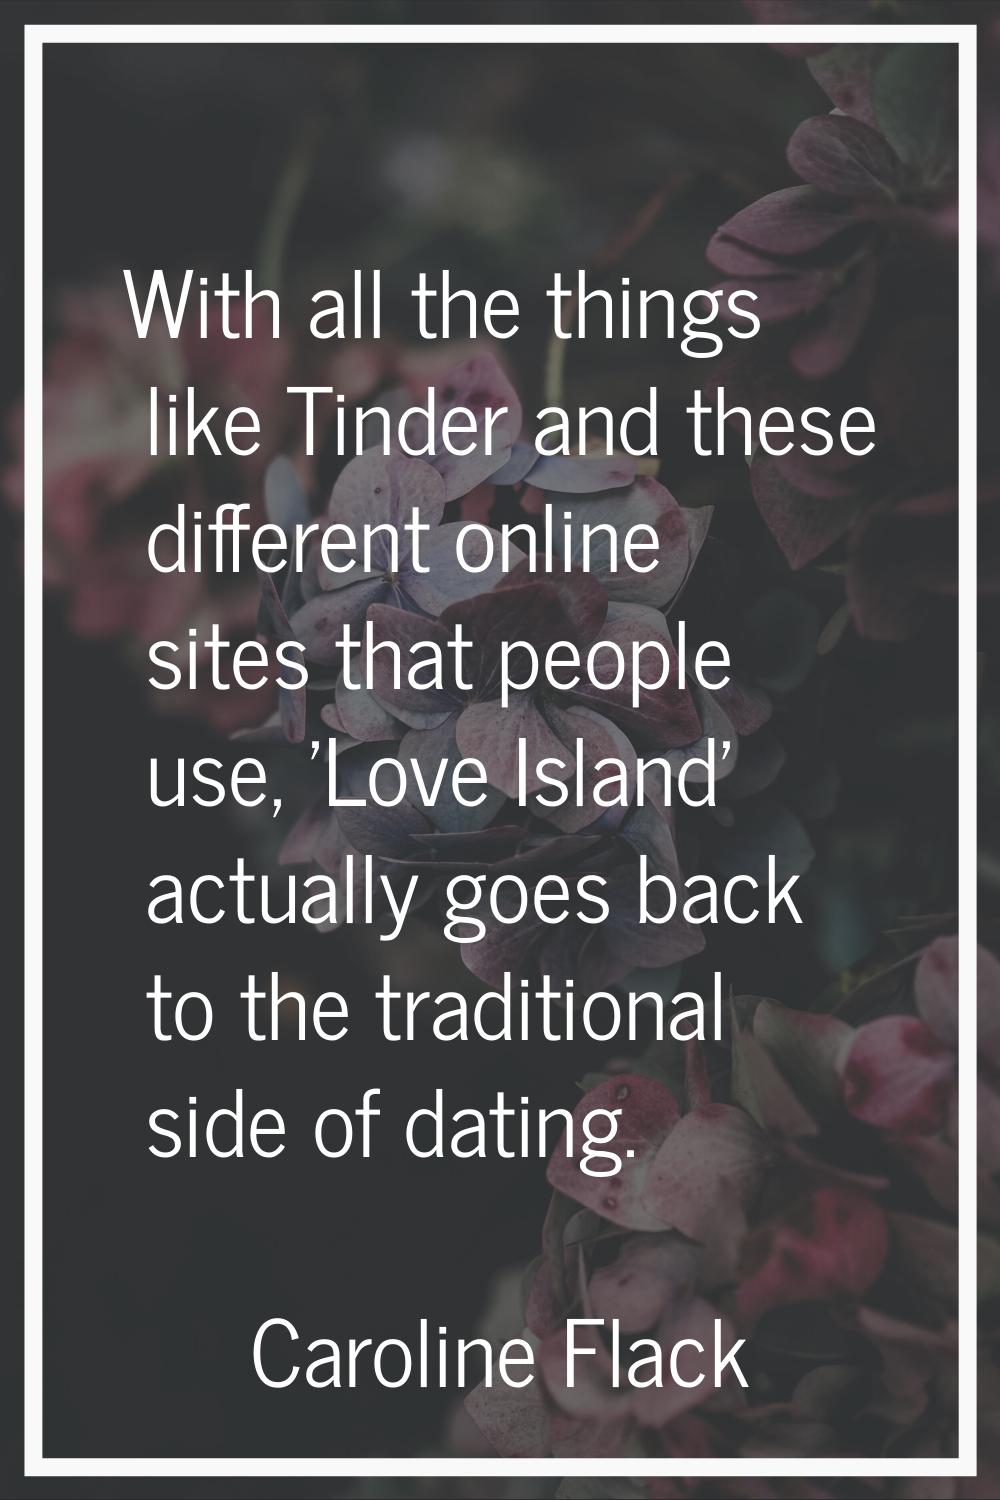 With all the things like Tinder and these different online sites that people use, 'Love Island' act